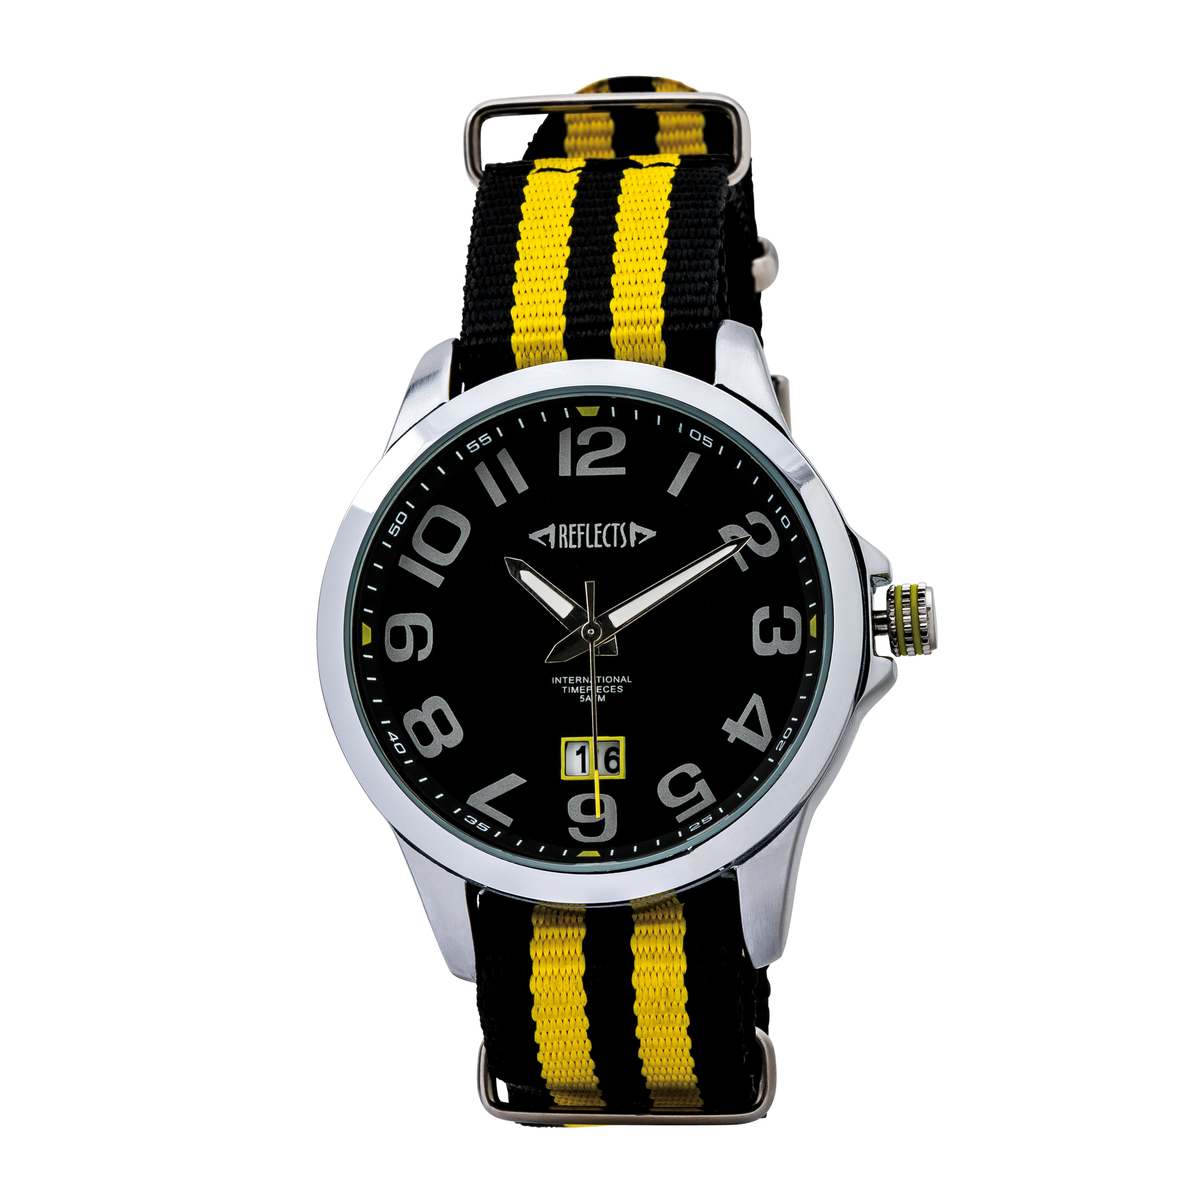 LM Armbanduhr REFLECTS-TREND YELLOW 